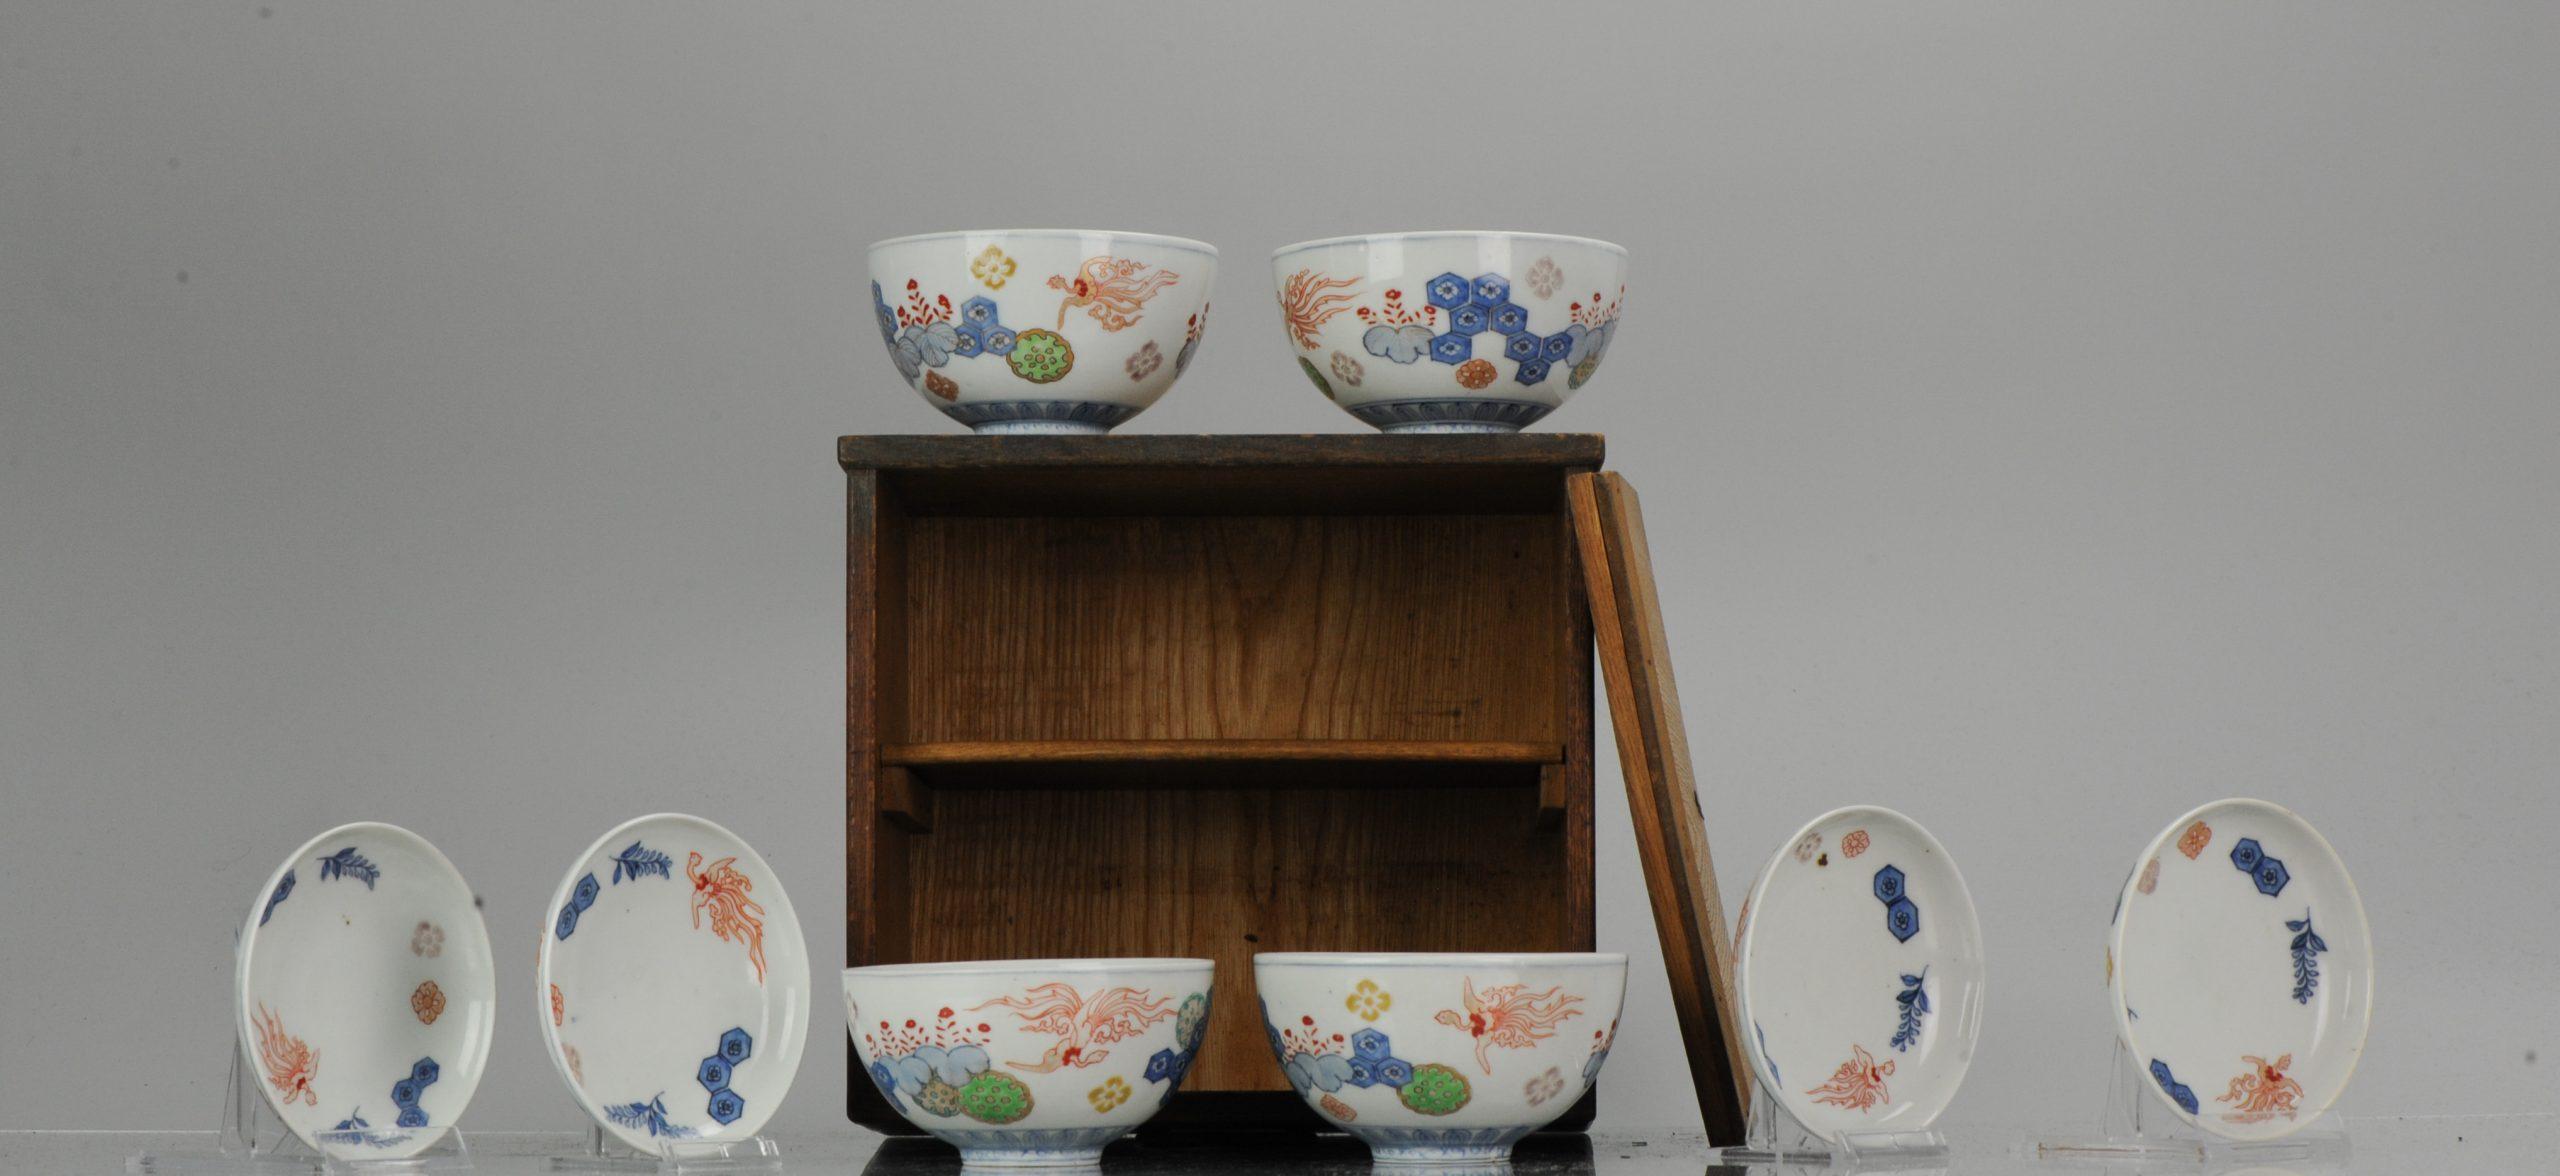 18th Century and Earlier #4 Antique 18/19th C Japanese Chaiwan Bowls Tea Drinking Porcelain Lidded Bowl For Sale